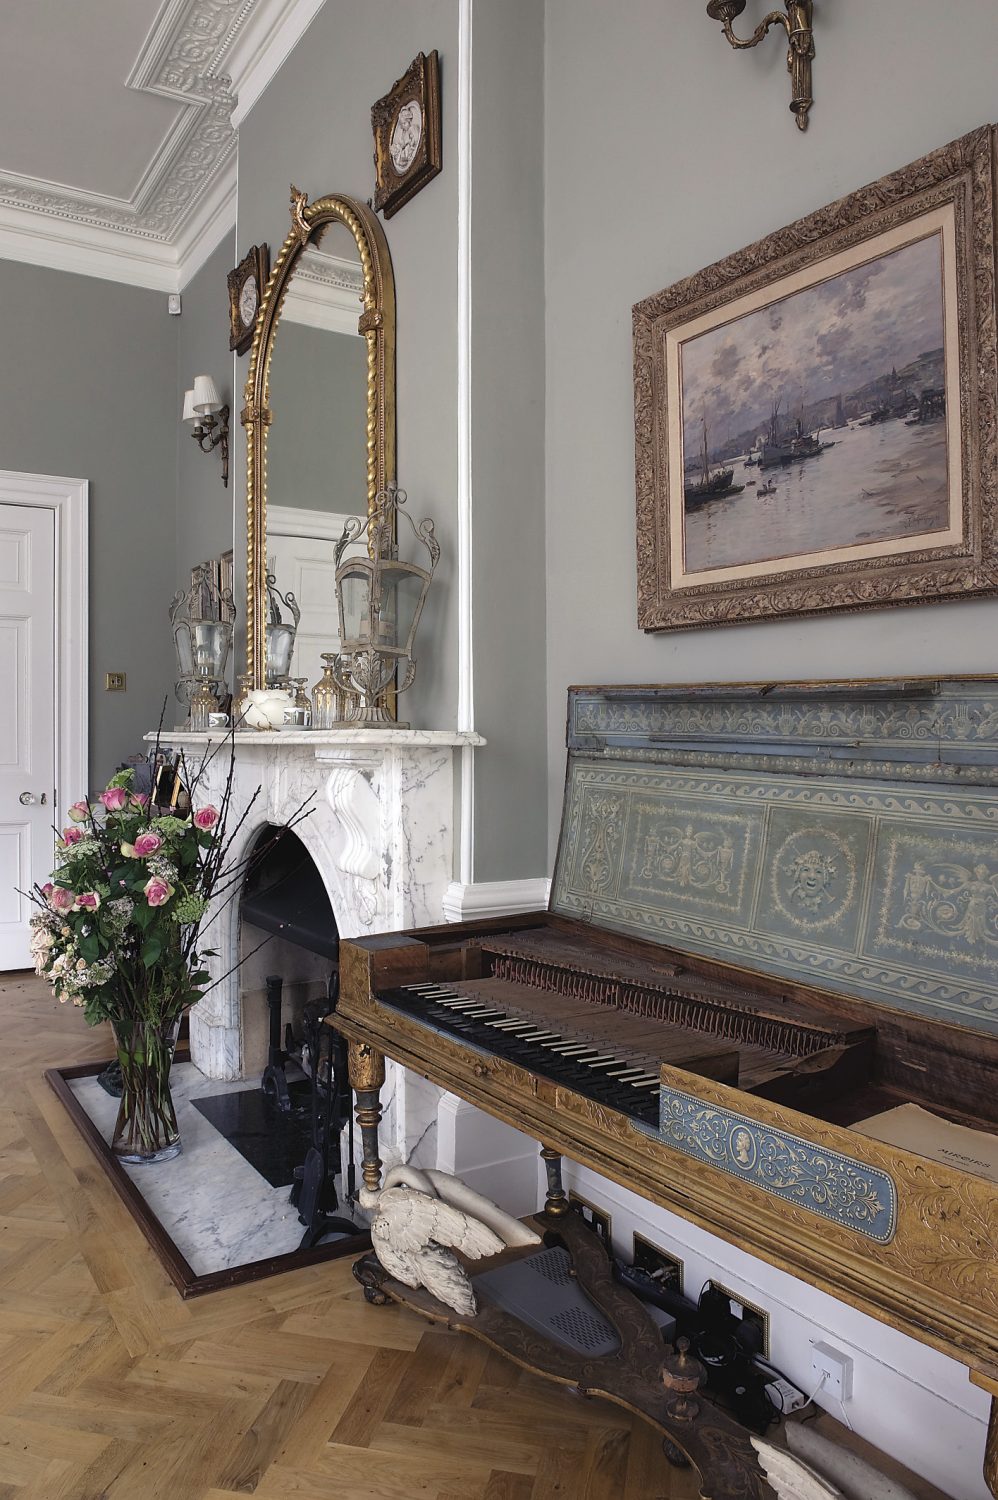 The exquisite eau de nil and gilded square piano, one of many in Theodora’s collection of antique pianos, was bought from David Winston at the Period Piano Company